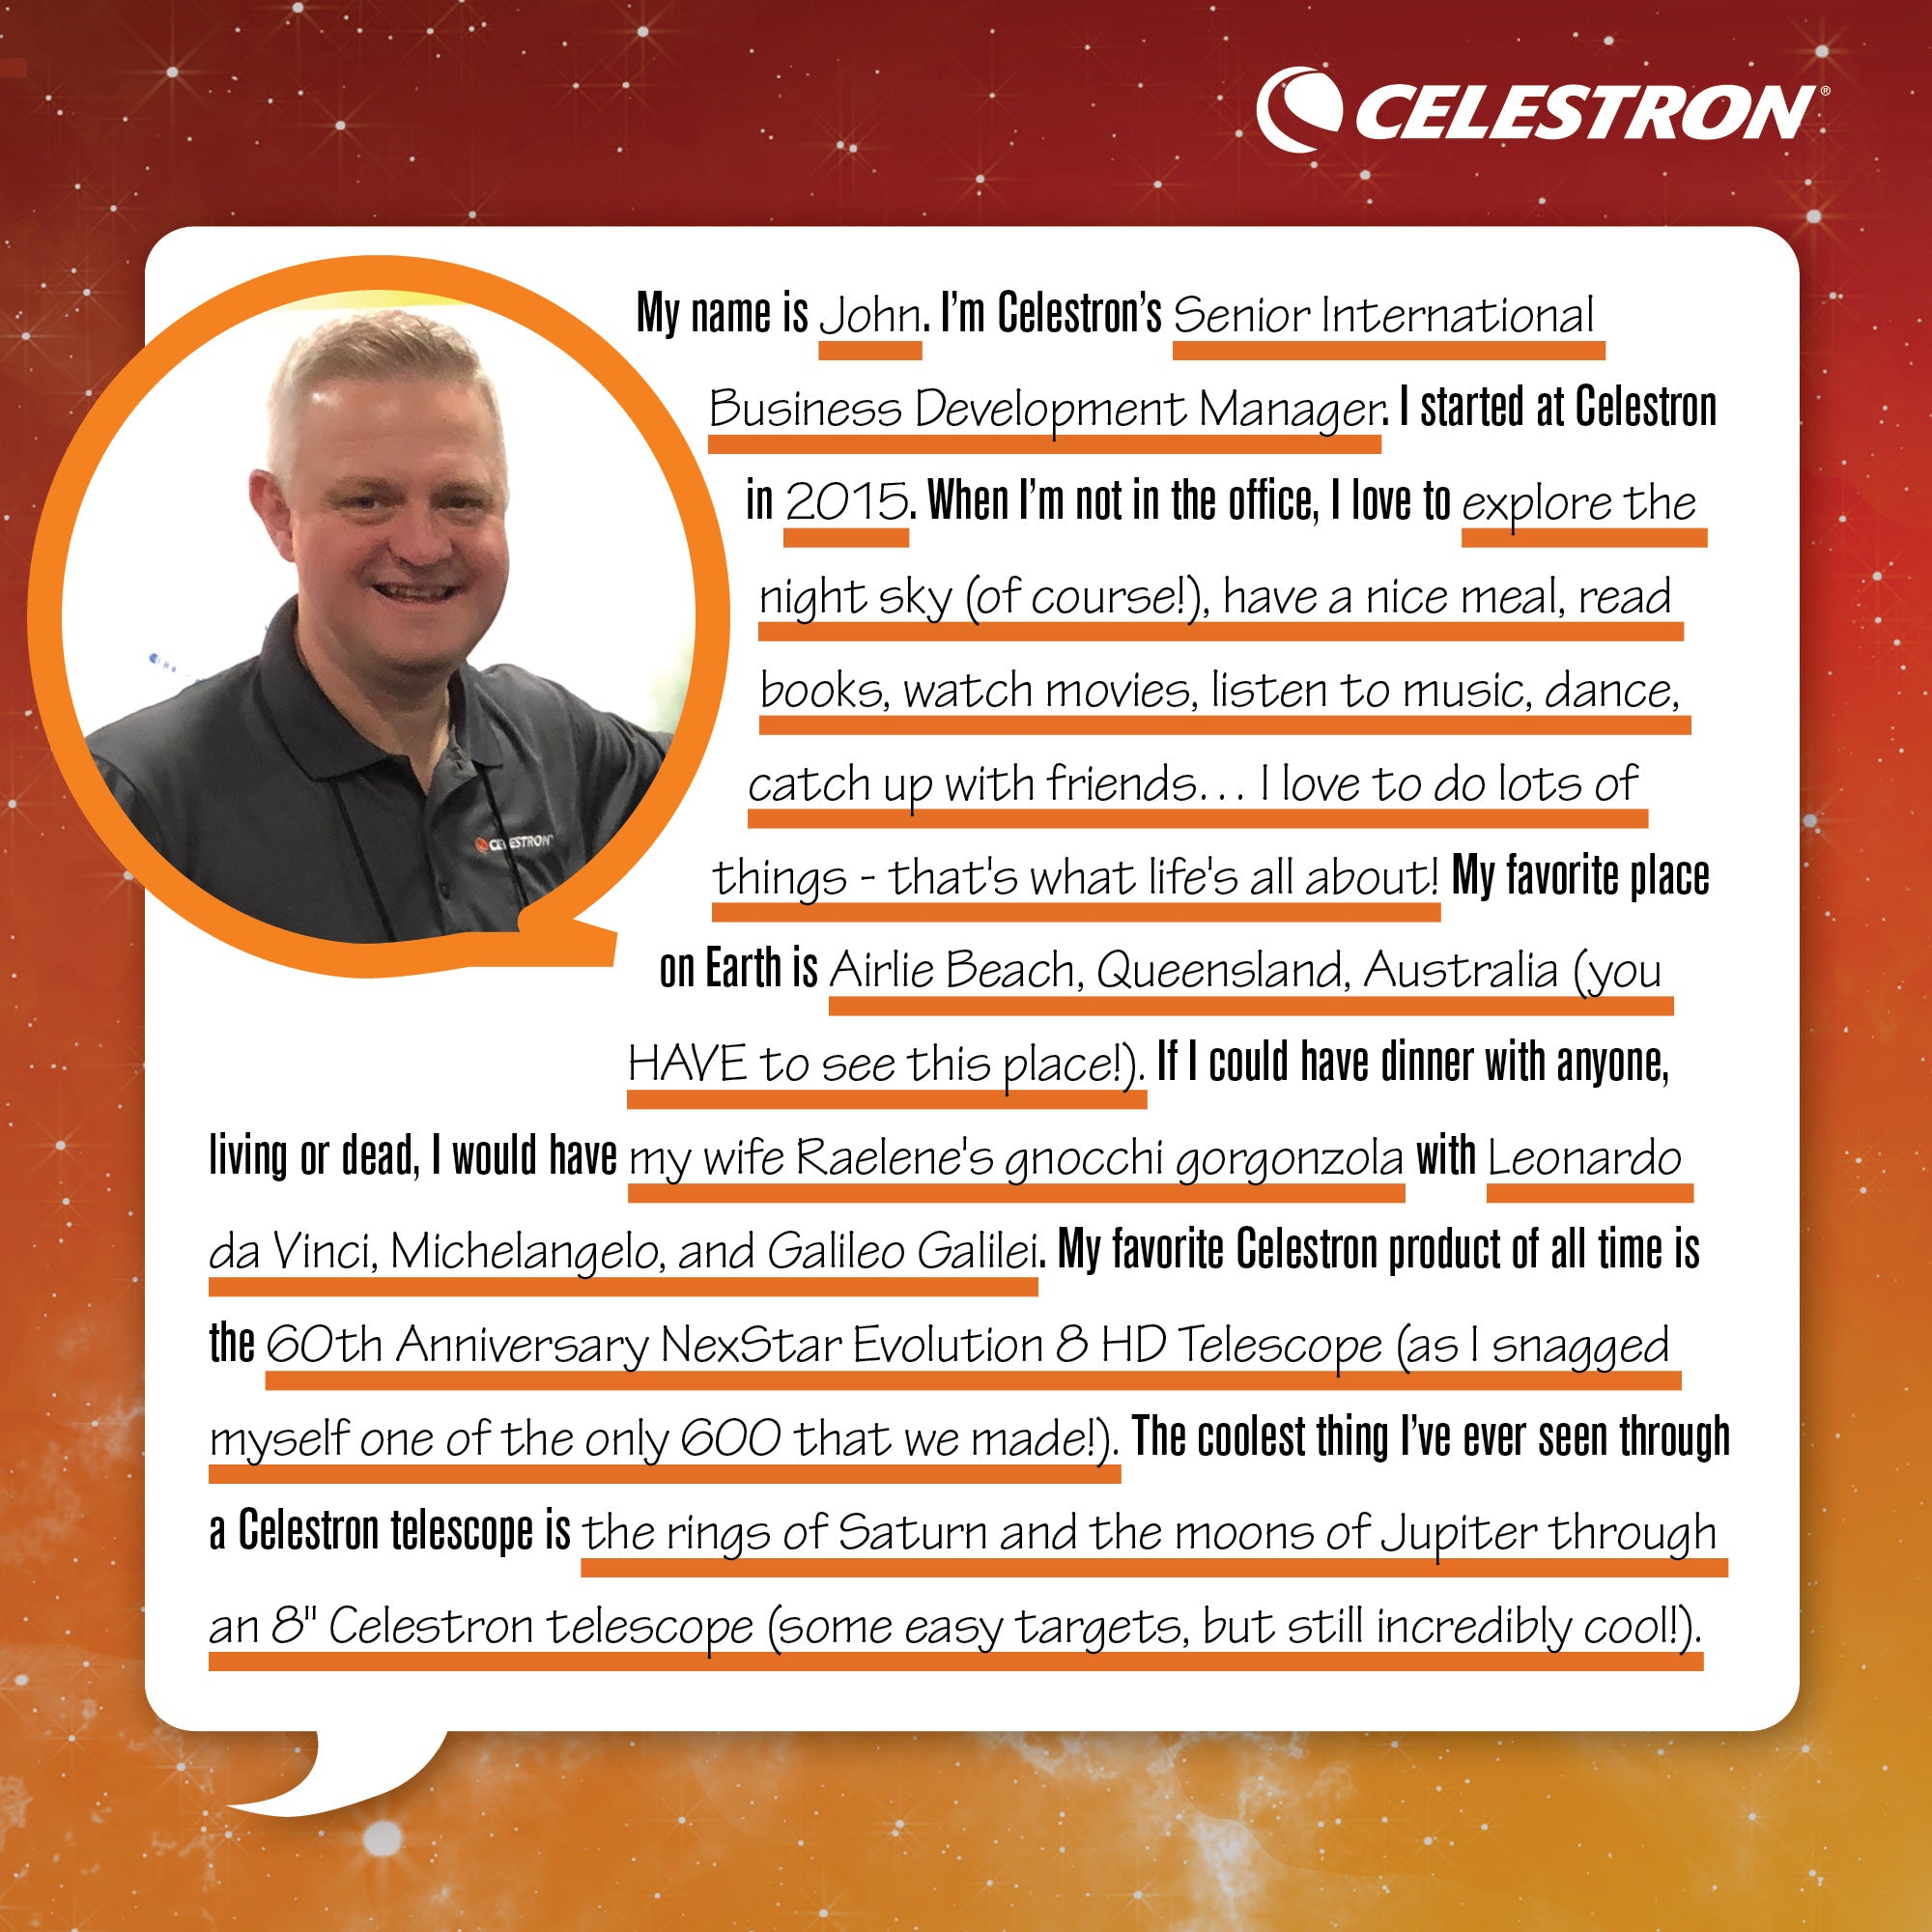 My name is John. I’m Celestron’s Senior International Business Development Manager. I started at Celestron in 2015. When I’m not in the office, I love to explore the night sky (of course!), have a nice meal, read books, watch movies, listen to music, dance, catch up with friends... I love to do lots of things - that's what life's all about! My favorite place on Earth is Airlie Beach, Queensland, Australia (you HAVE to see this place!). If I could have dinner with anyone, living or dead, I would have my wife Raelene's gnocchi gorgonzola with Leonardo da Vinci, Michelangelo, and Galileo Galilei. My favorite Celestron product of all time is the the 60th Anniversary NexStar Evolution 8 HD Telescope (as I snagged myself one of the only 600 that we made!). The coolest thing I’ve ever seen through a Celestron telescope is the rings of Saturn and the moons of Jupiter through an 8-inch Celestron telescope (some easy targets, but still incredibly cool!).